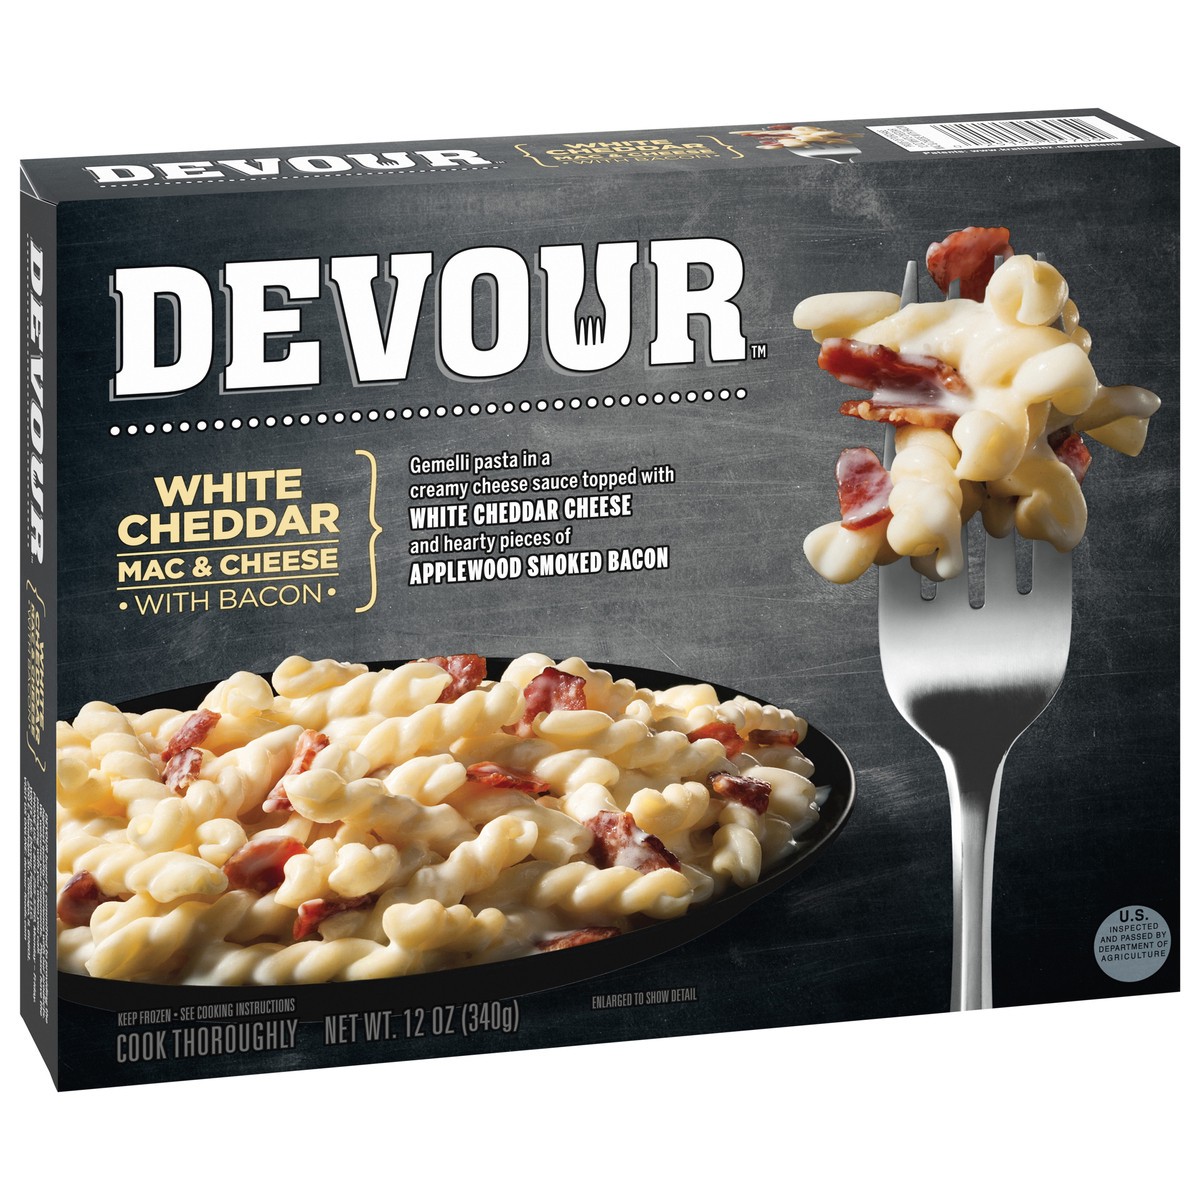 slide 9 of 9, DEVOUR White Cheddar Mac & Cheese with Bacon, 12 oz